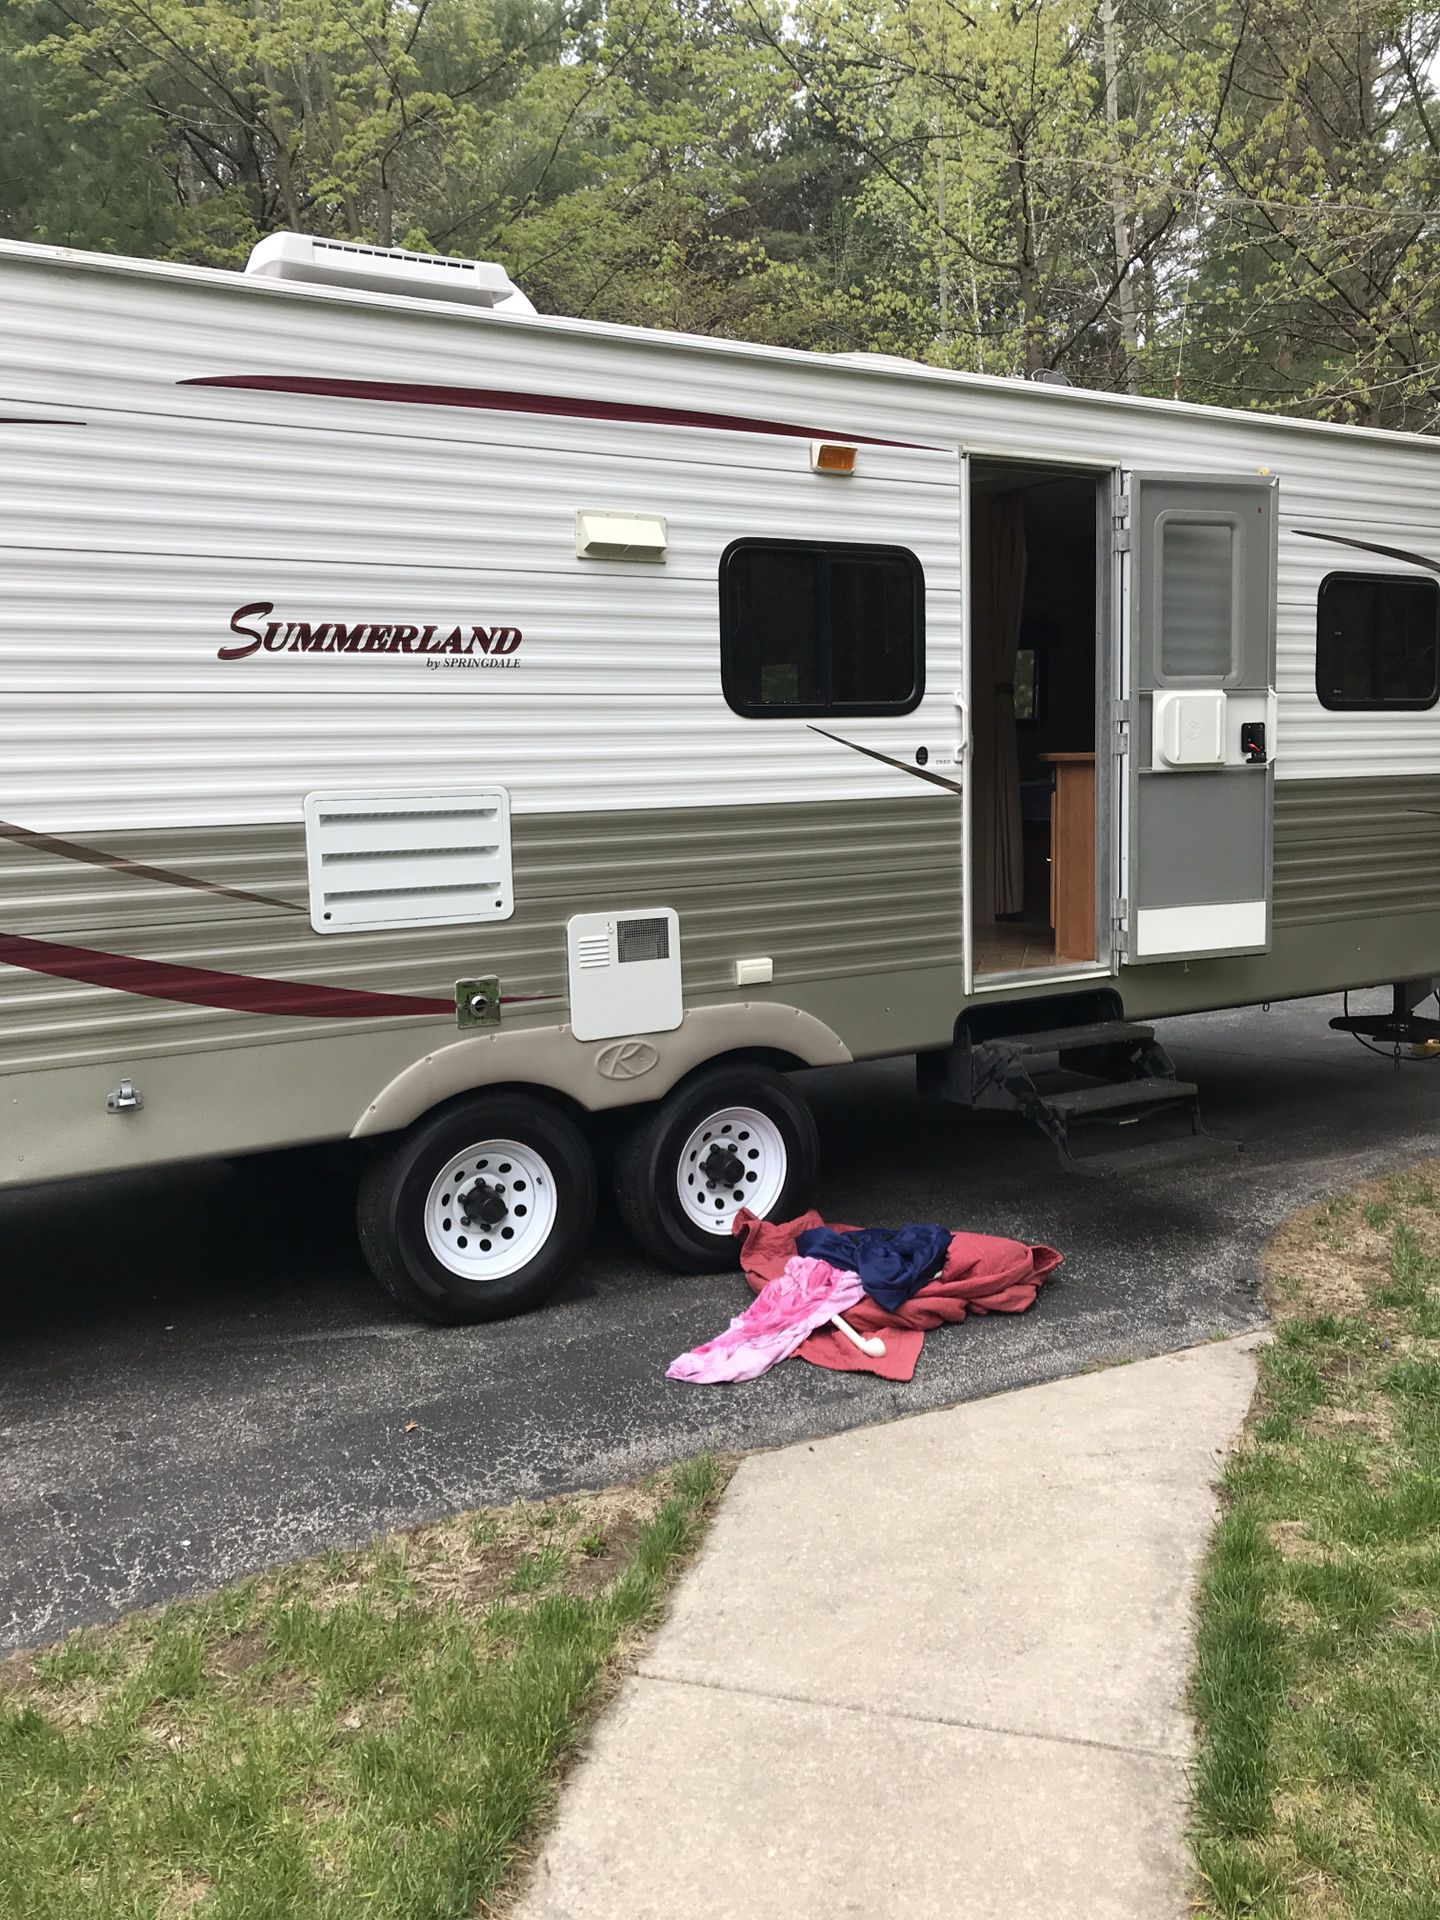 Photo FOR SALE Summerland by Springdale 30 foot 2007 1 slide out New tires New 18 foot awning Many accessories available Message me if interested $8750.00